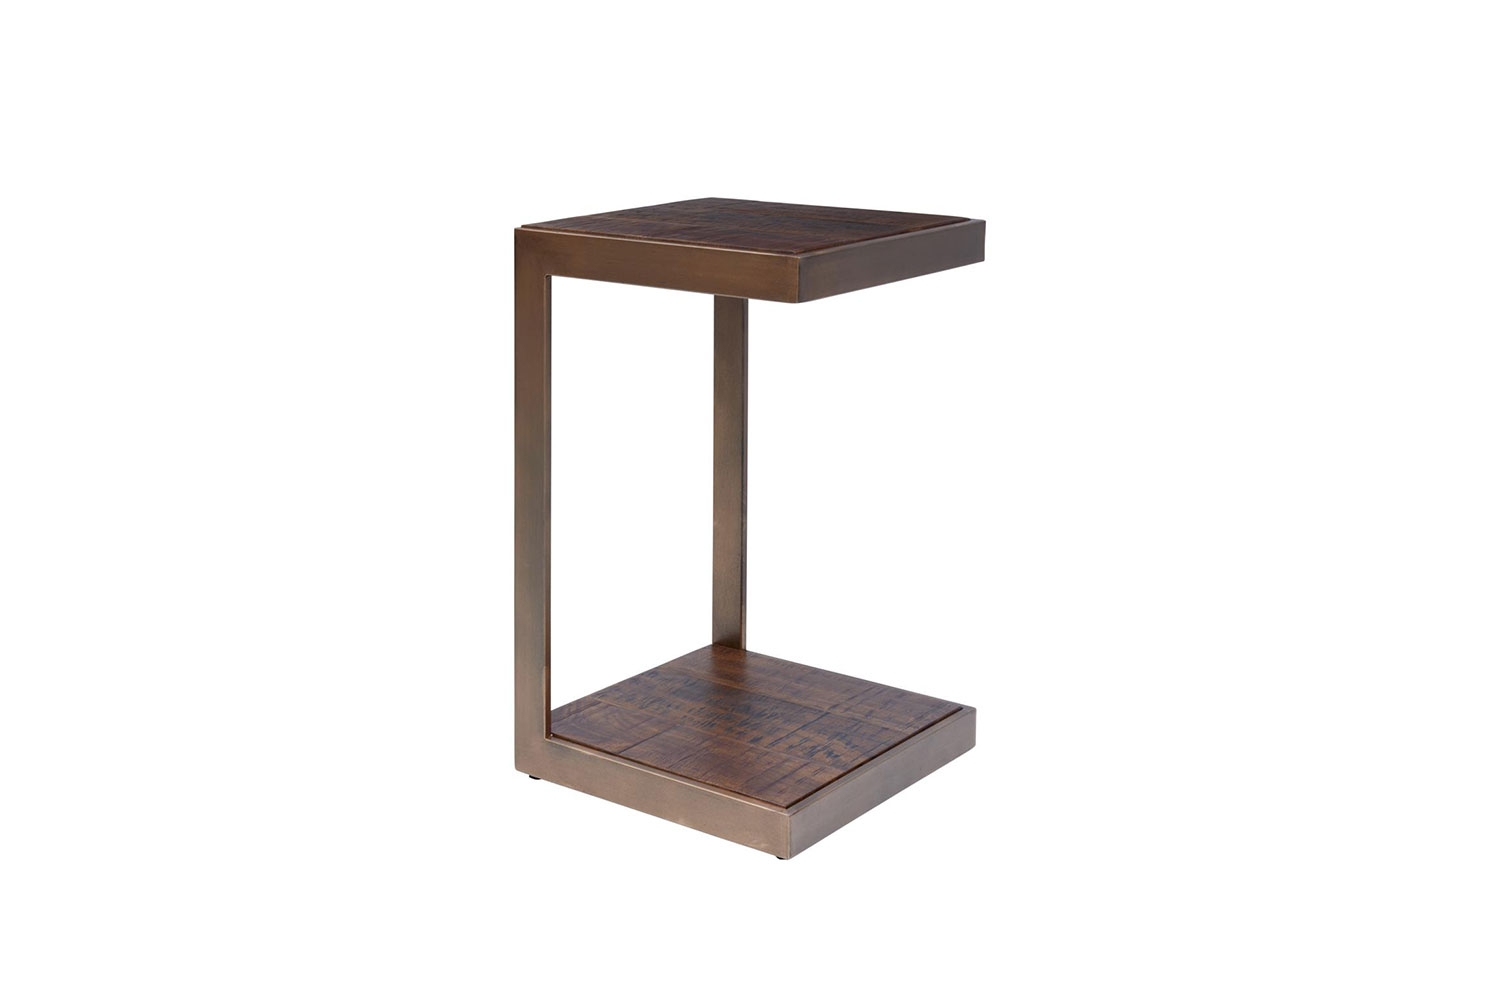 Stella end table in copper, angled.